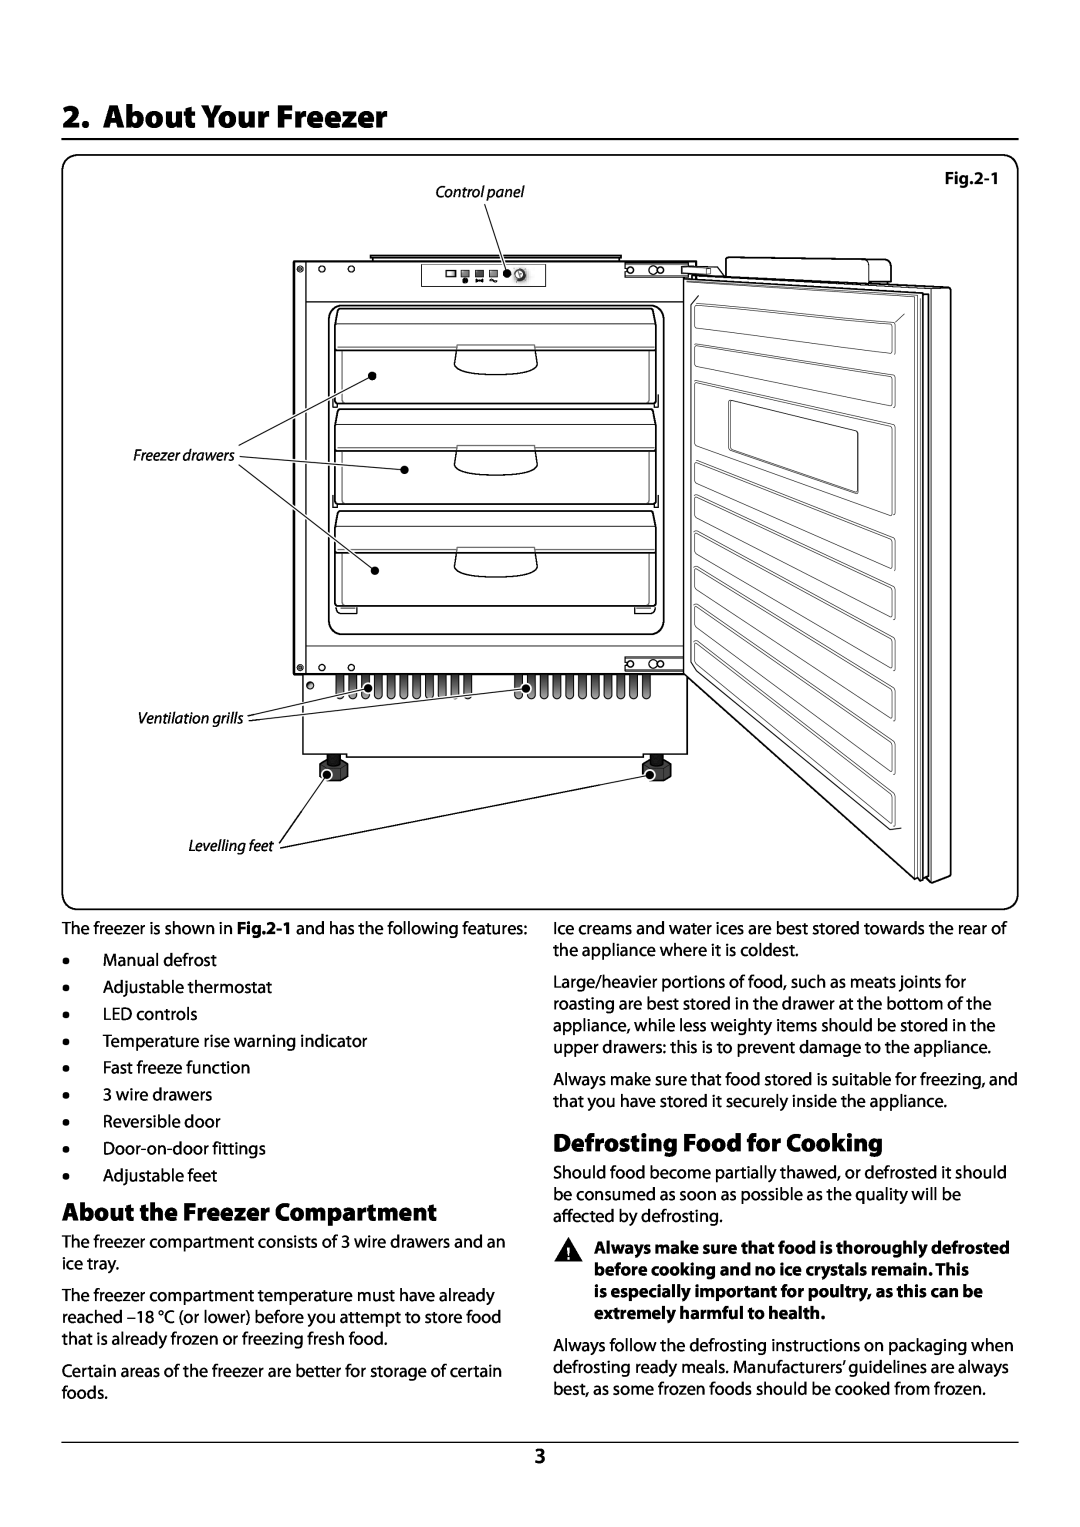 Rangemaster U110120 - 01A manual About Your Freezer, About the Freezer Compartment, Defrosting Food for Cooking 